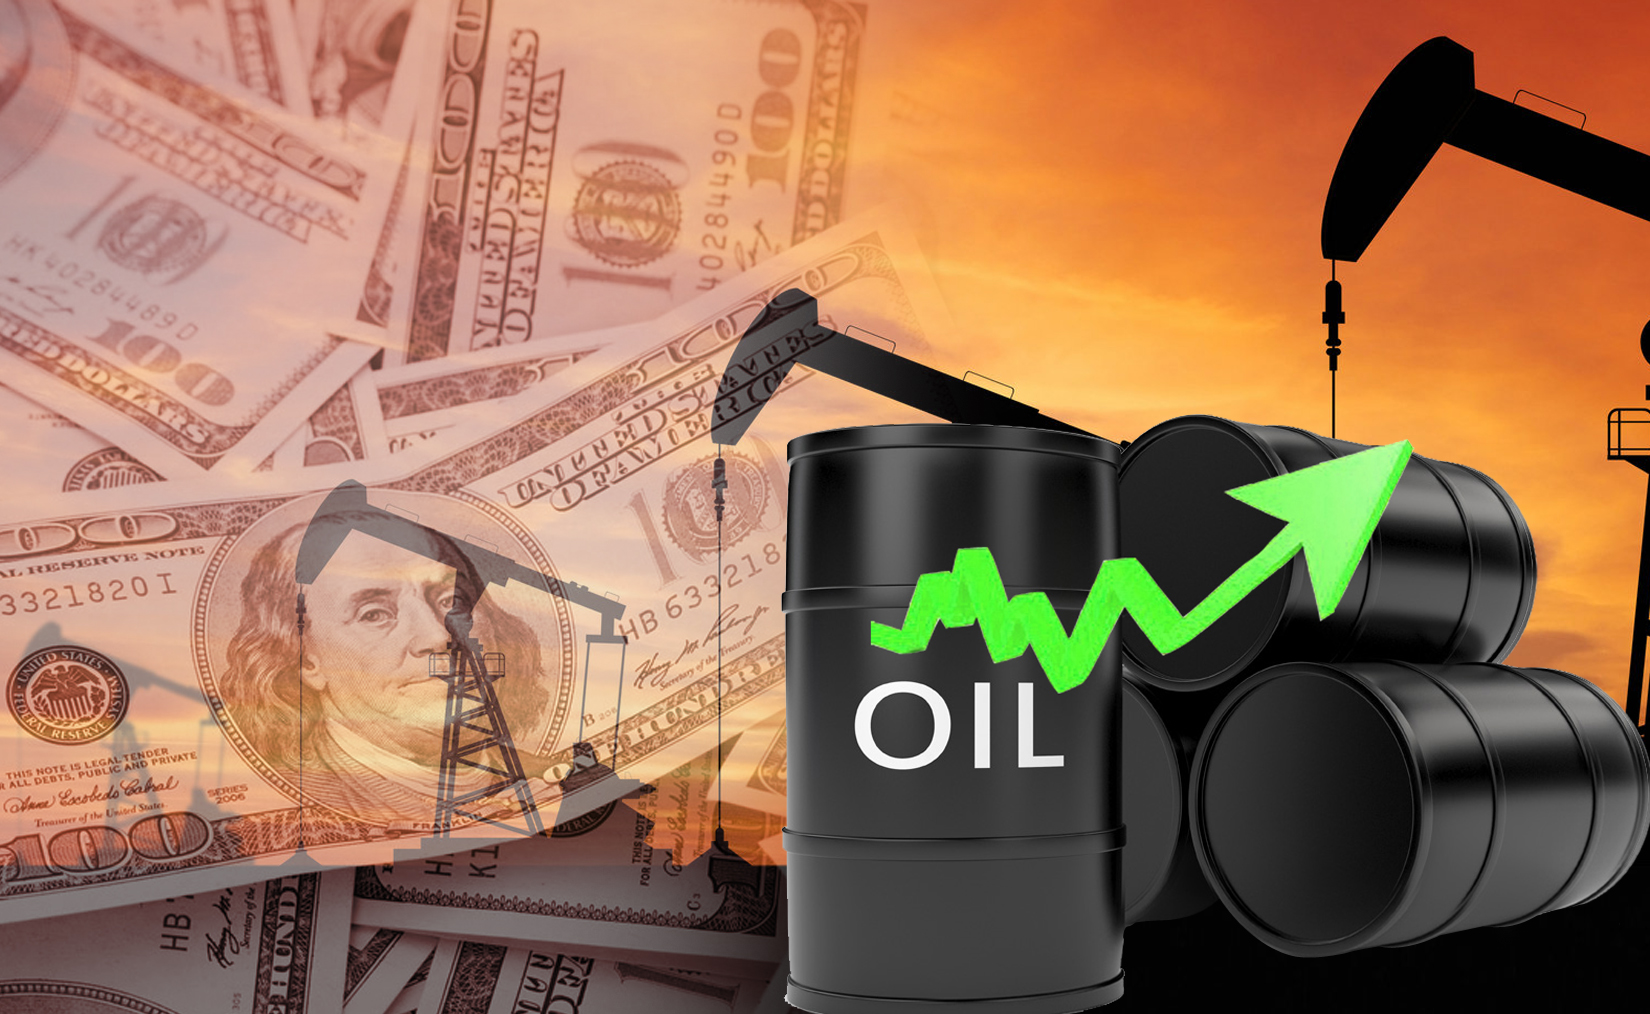 Kuwaiti oil price up by 94 cents to USD 68.04                                                                                                                                                                                                             